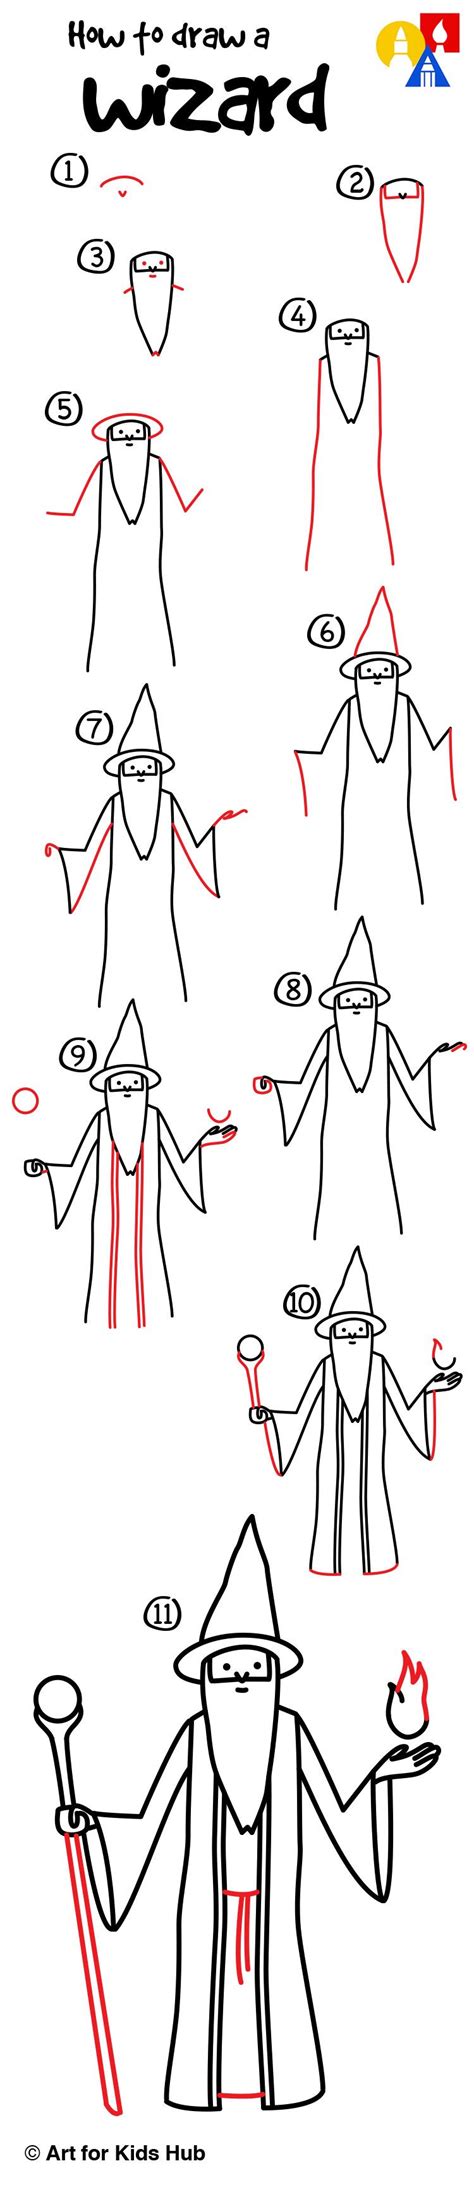 How To Draw A Wizard Art For Kids Hub For Kids Art For Kids And